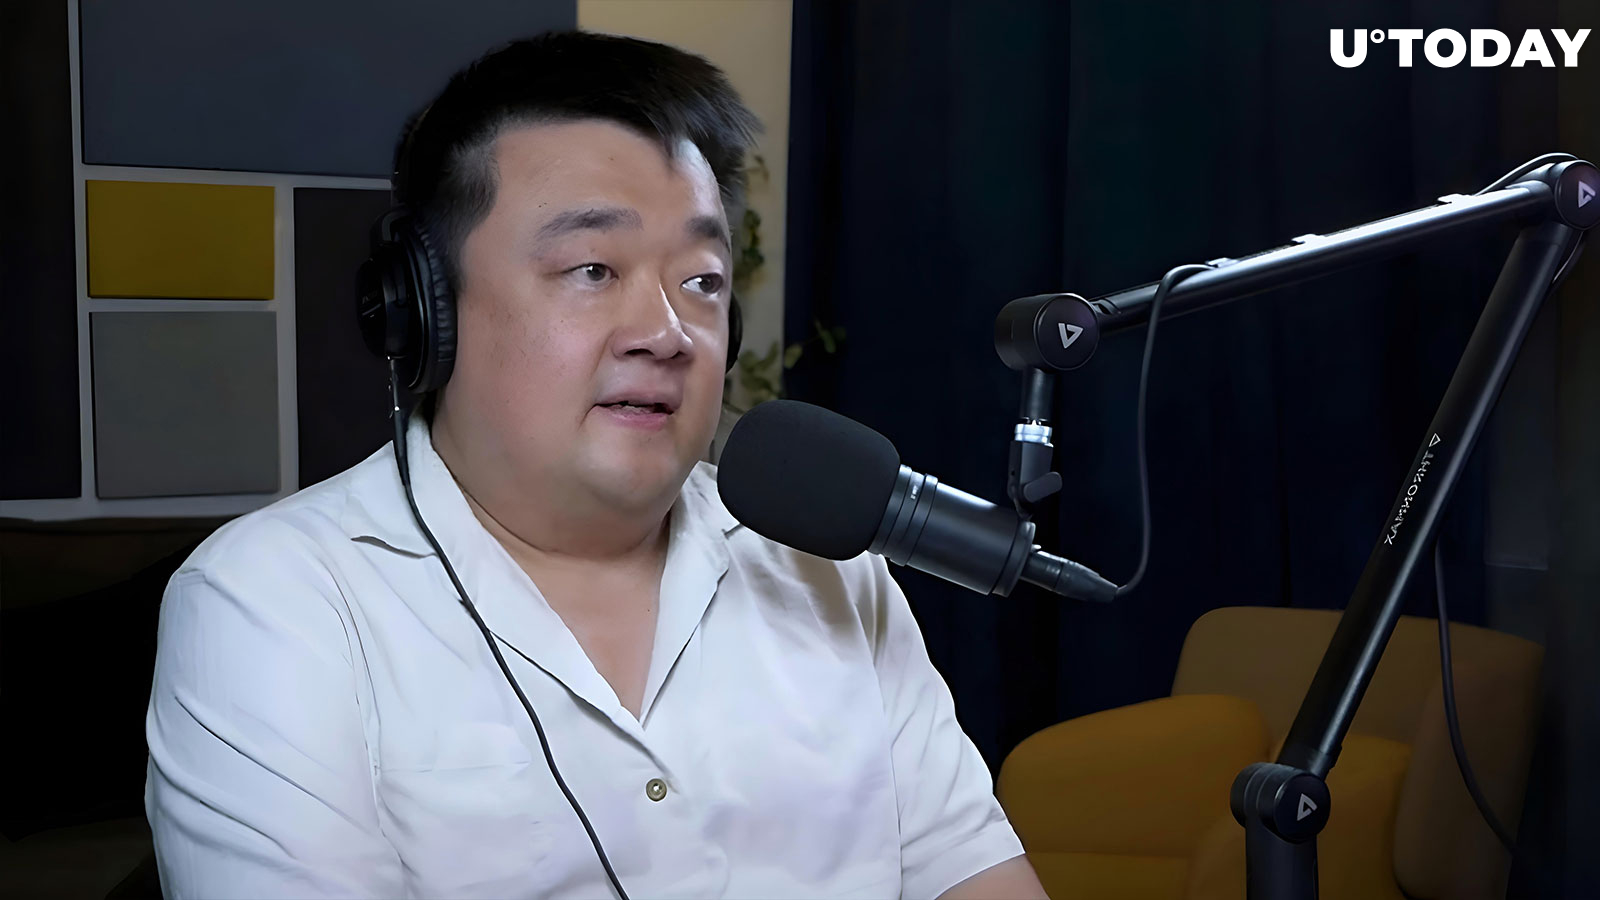 Bitcoin Veteran Bobby Lee Optimistic About Bitcoin's Future, Calls for Increased Regulation